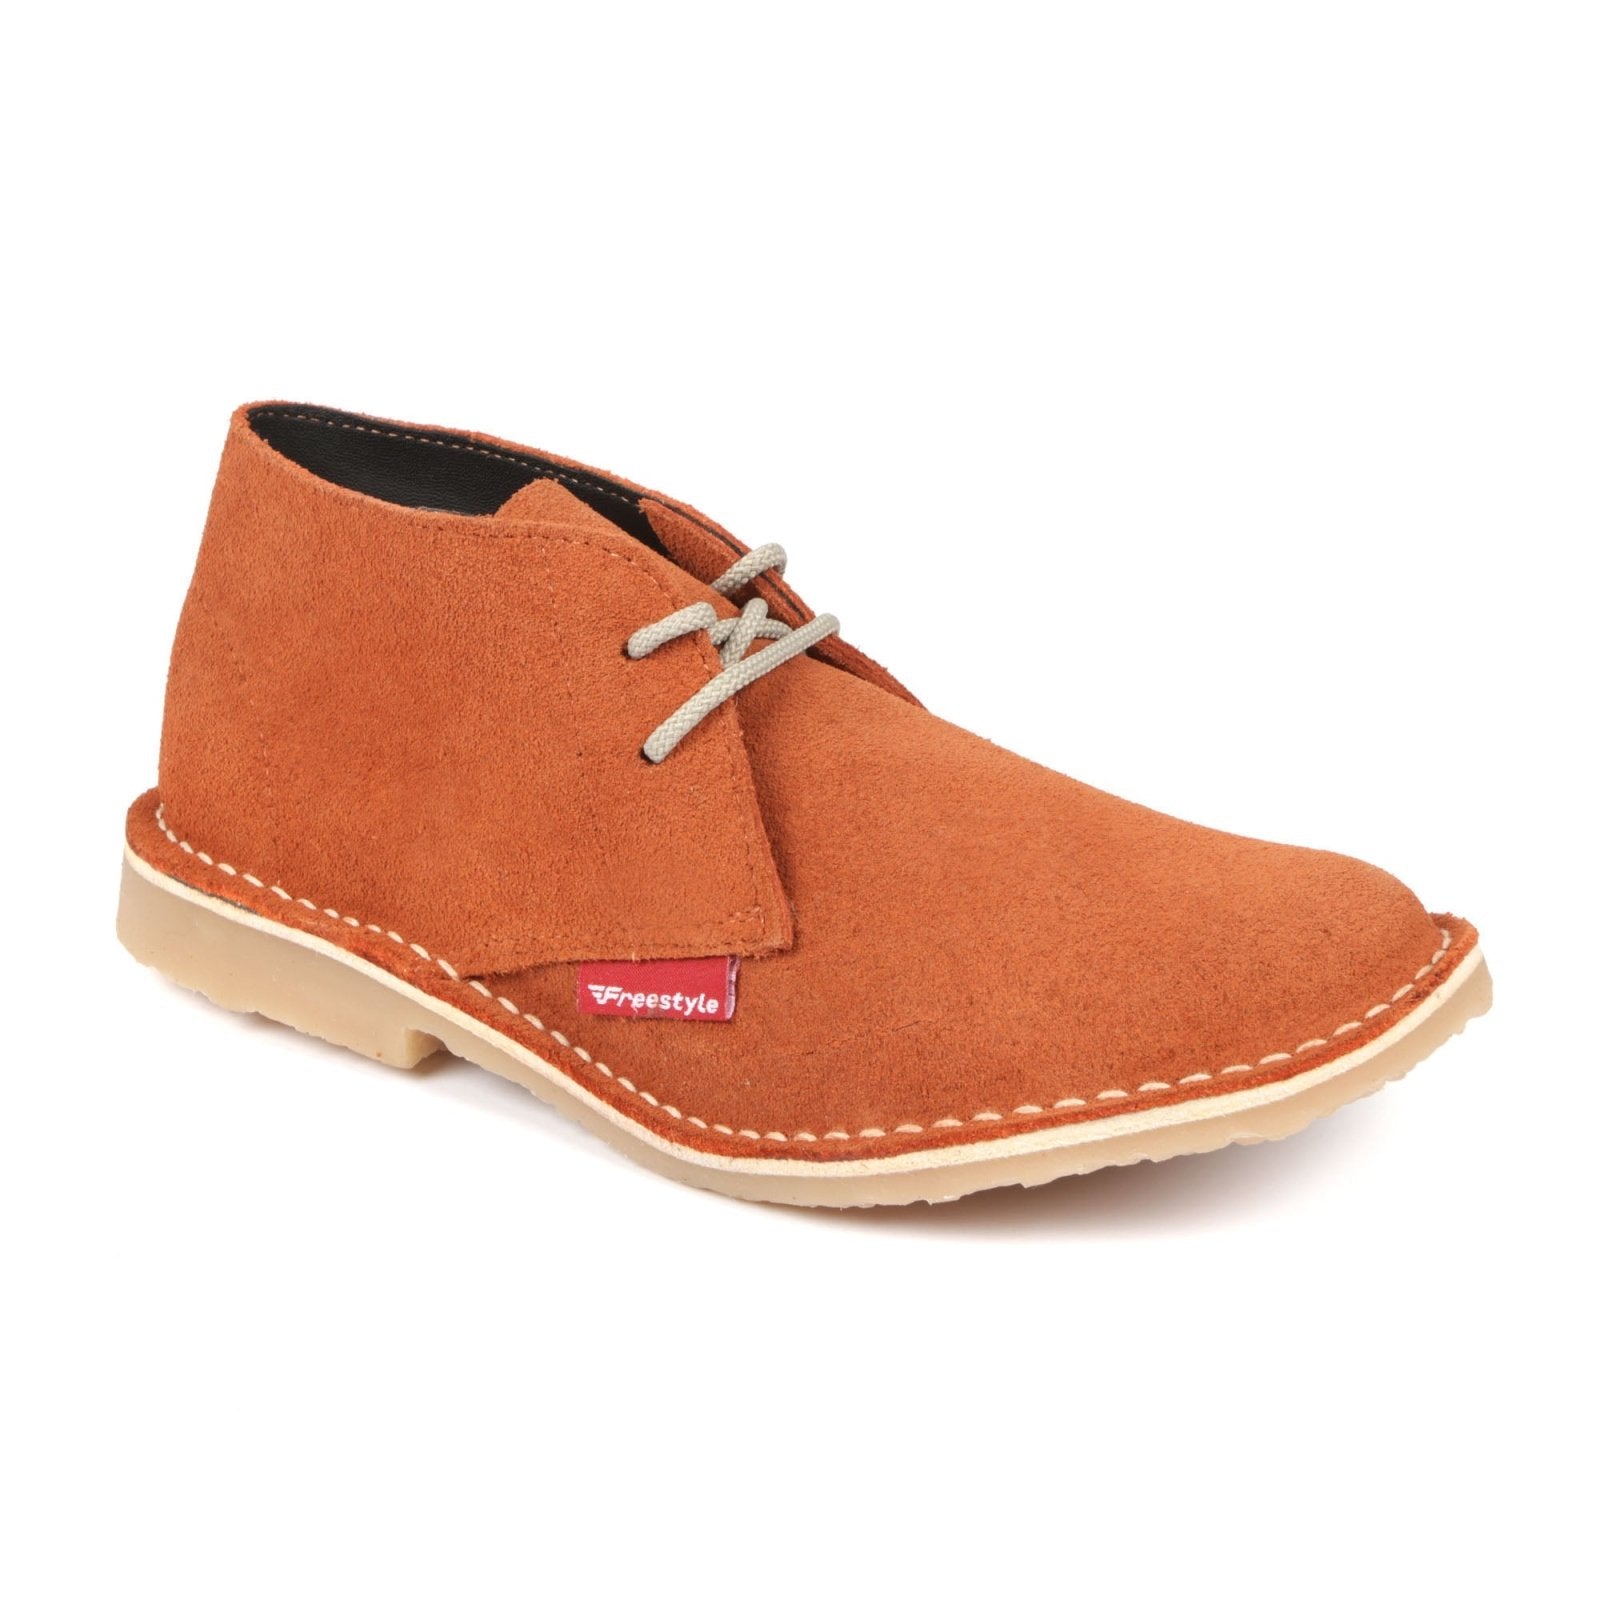 Hunter Vellie Unisex Premium Suede - Orange - Freestyle SA Proudly local vellies leather boots veldskoens vellies leather shoes suede veldskoens